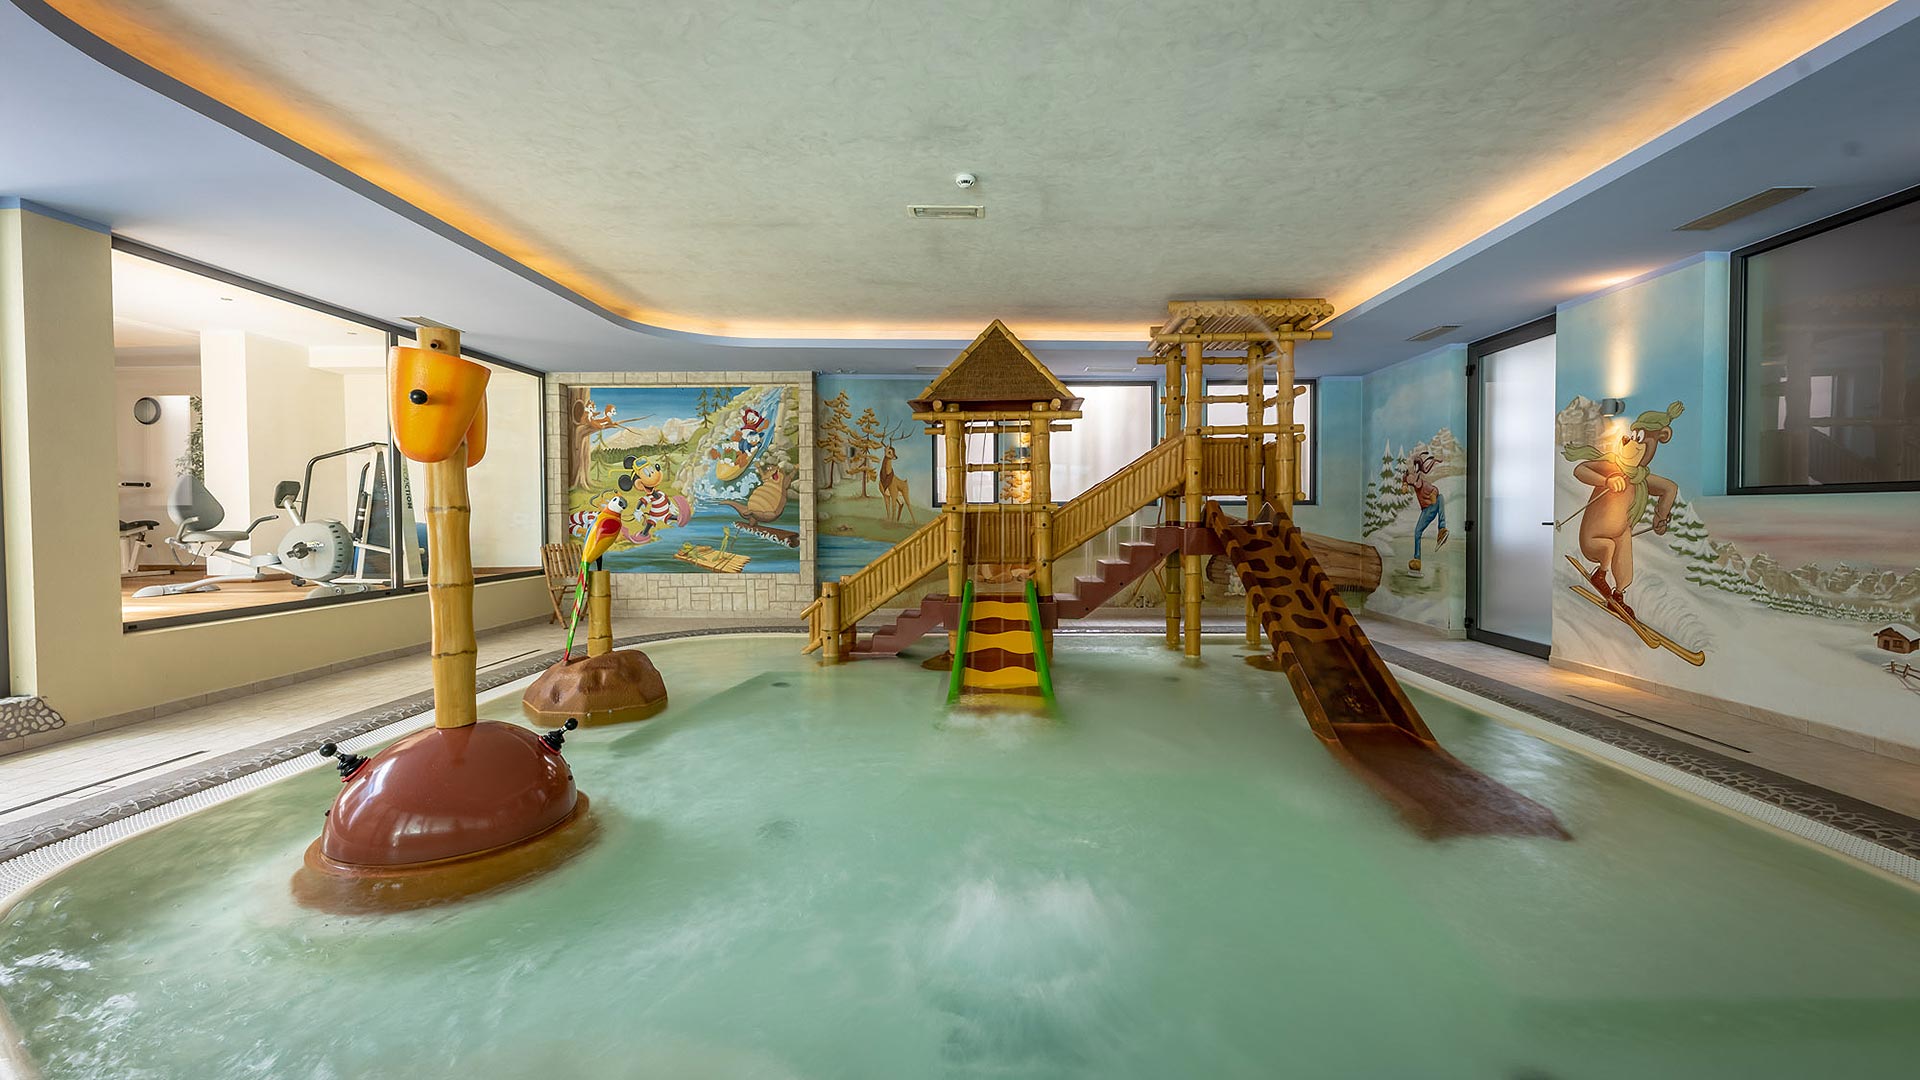 In our Family Hotel with SPA in Trentino, you will find a small water playground dedicated to your children.